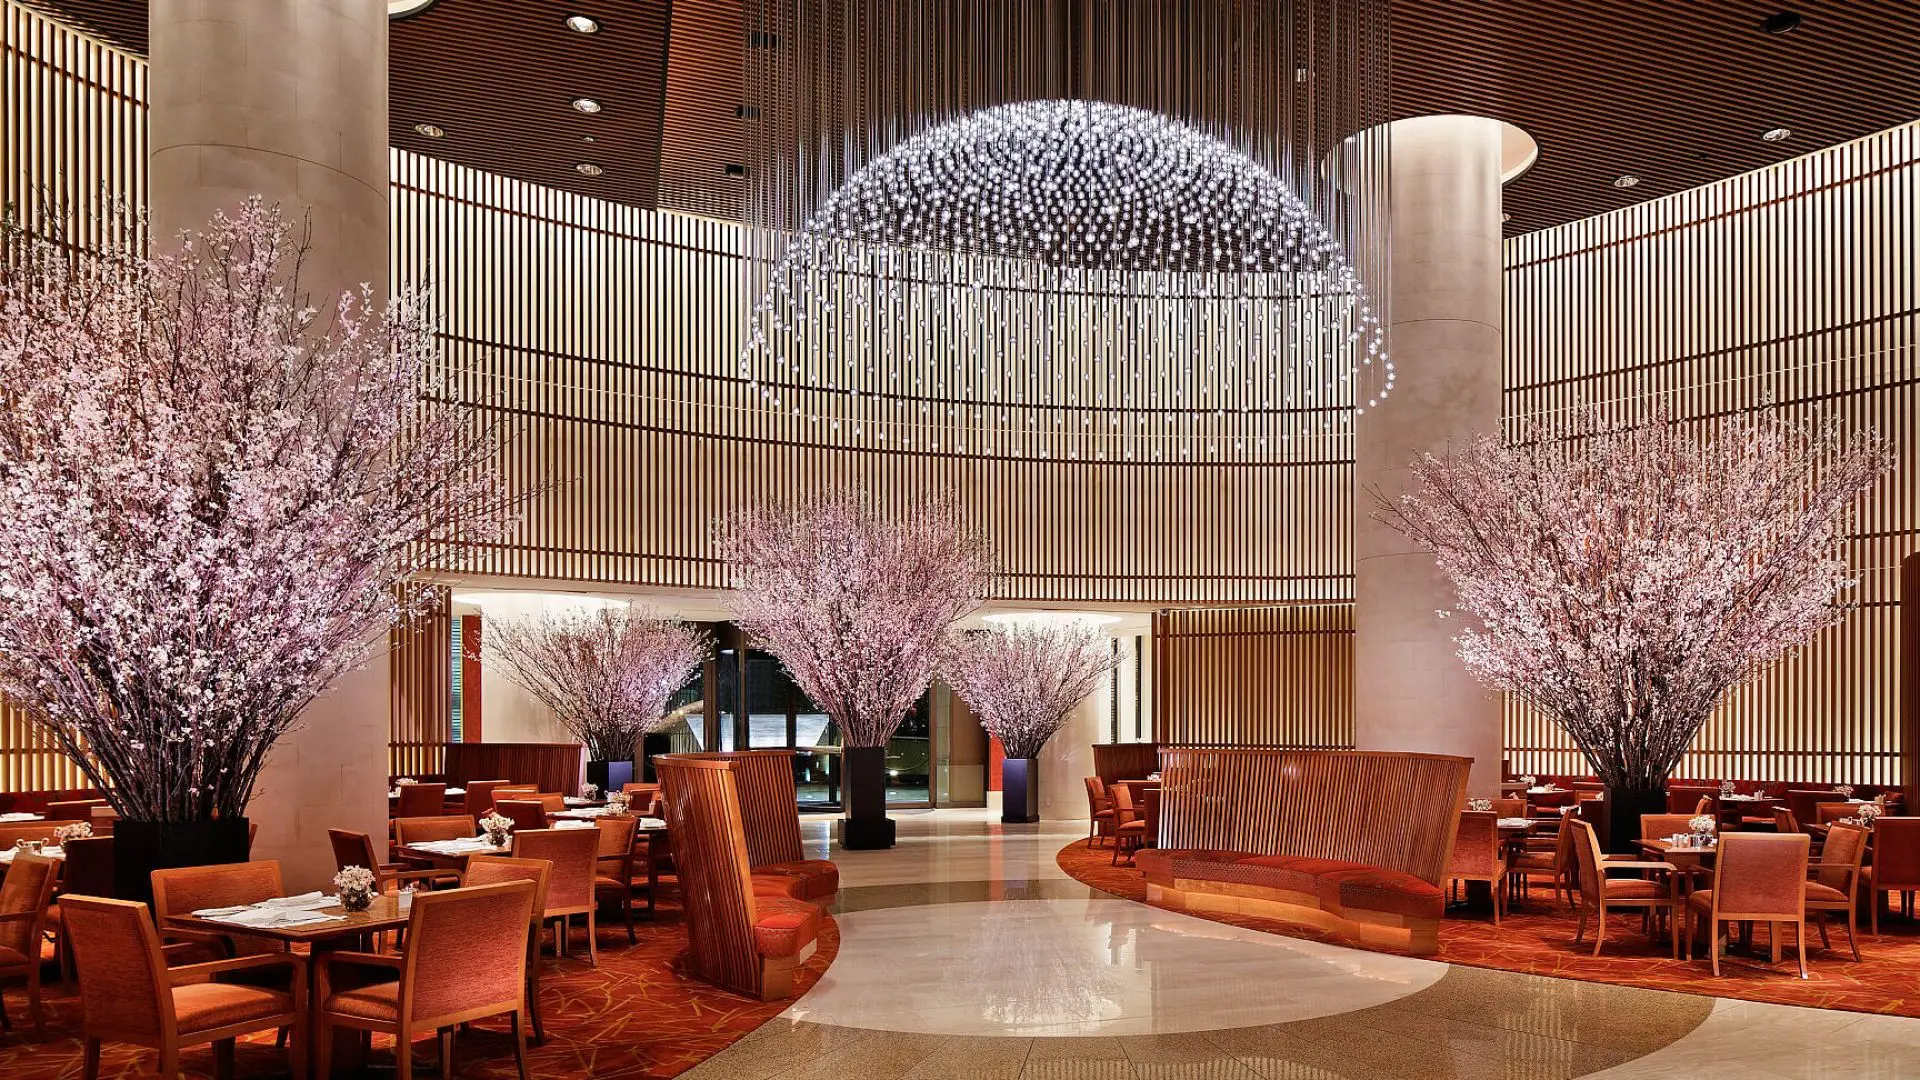 Lounge area at the Peninsuala with japaneese pink trees, red design seating area and marble floors.